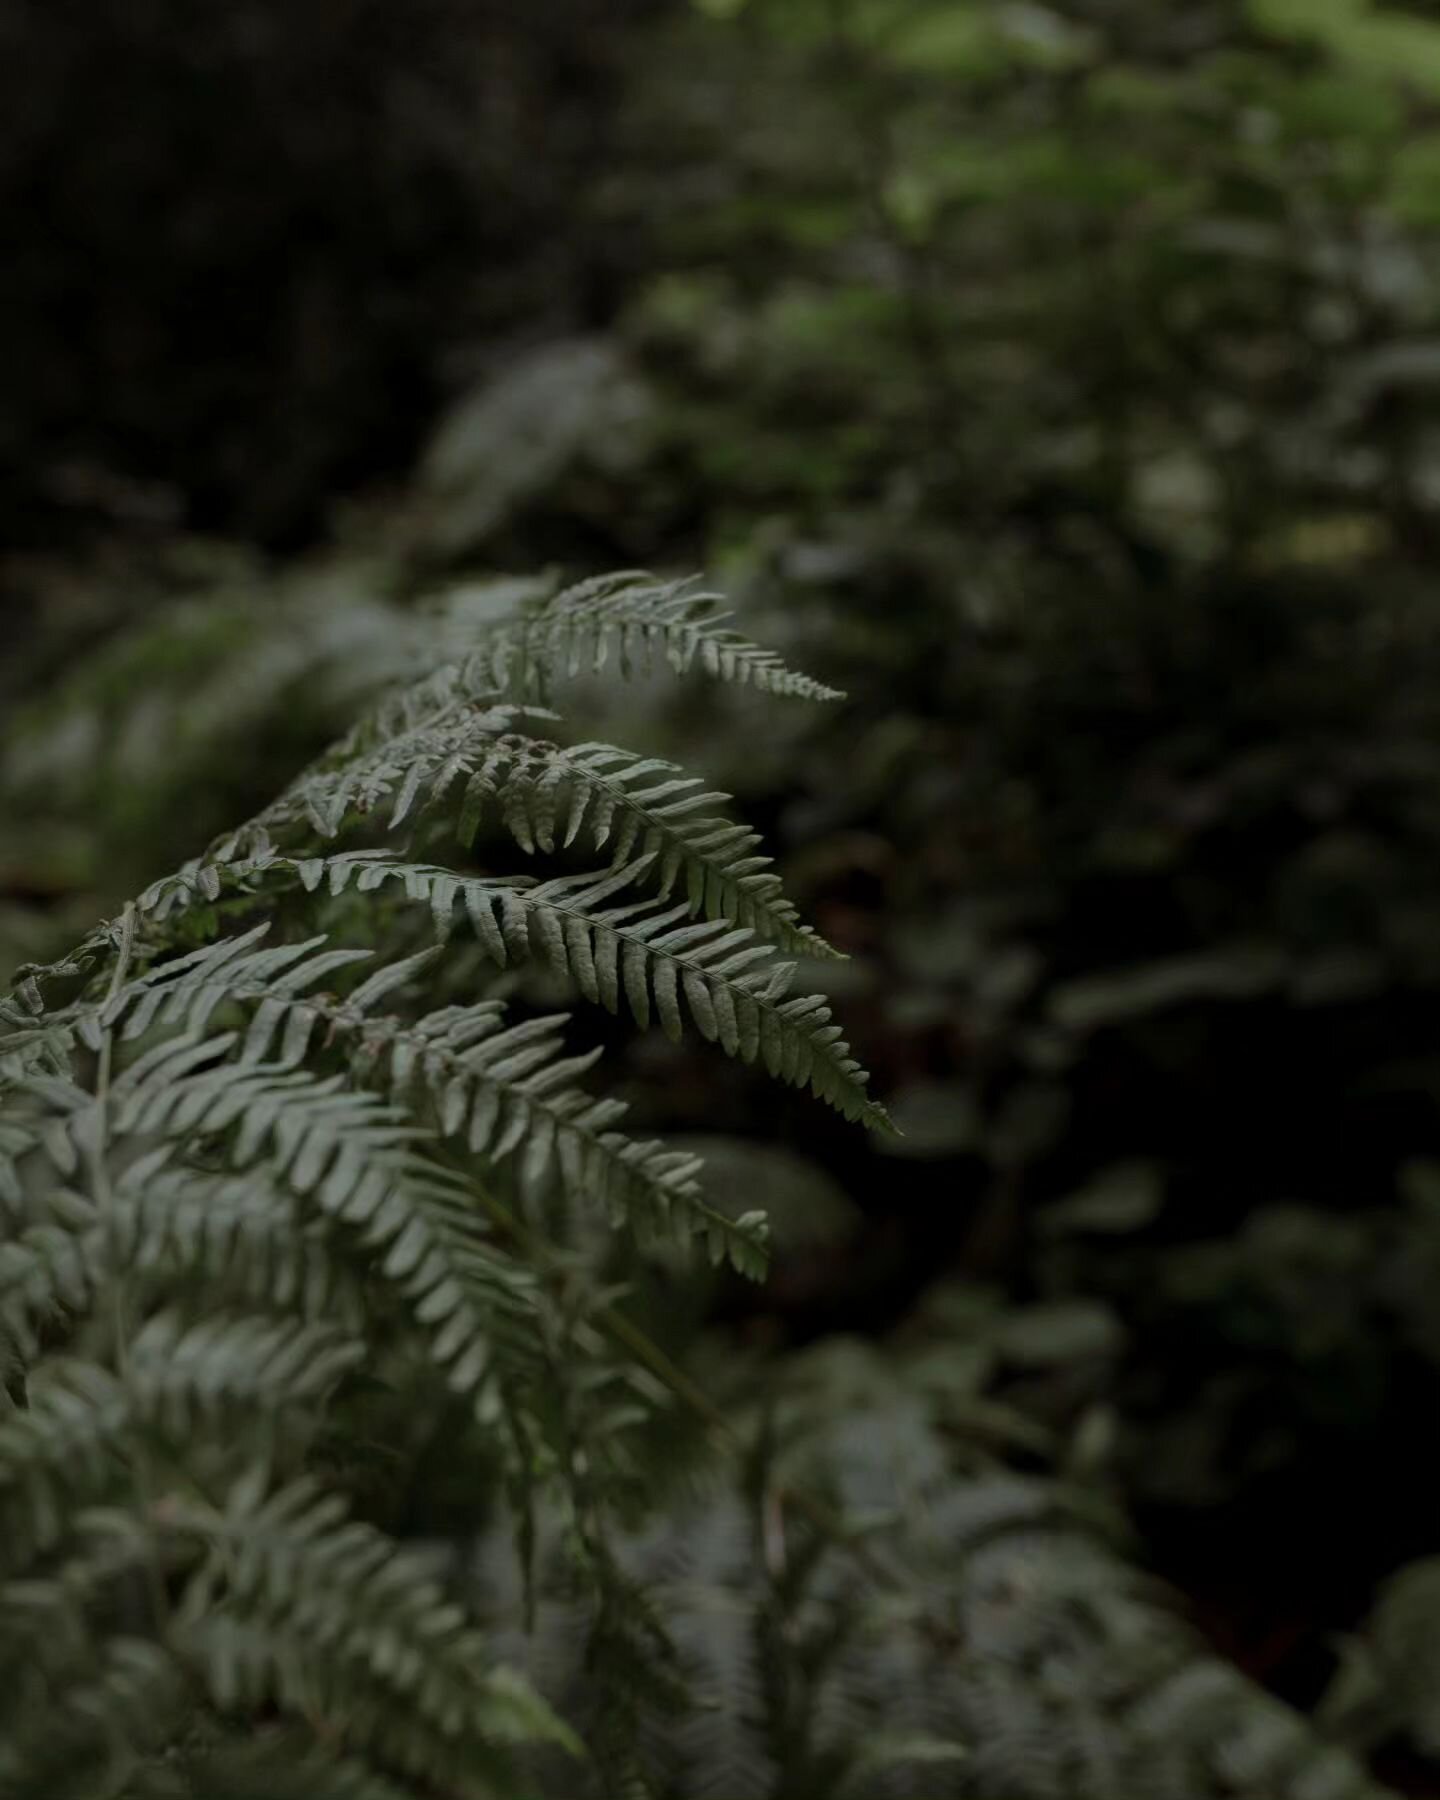 Beyond its soft, whispy charms the fern holds insights into evolution's tapestry.

With each frond's unfurling, it hints at eons of adaptation and the delicate dance between form and function - as a designer, and photographer this is a dance I know i